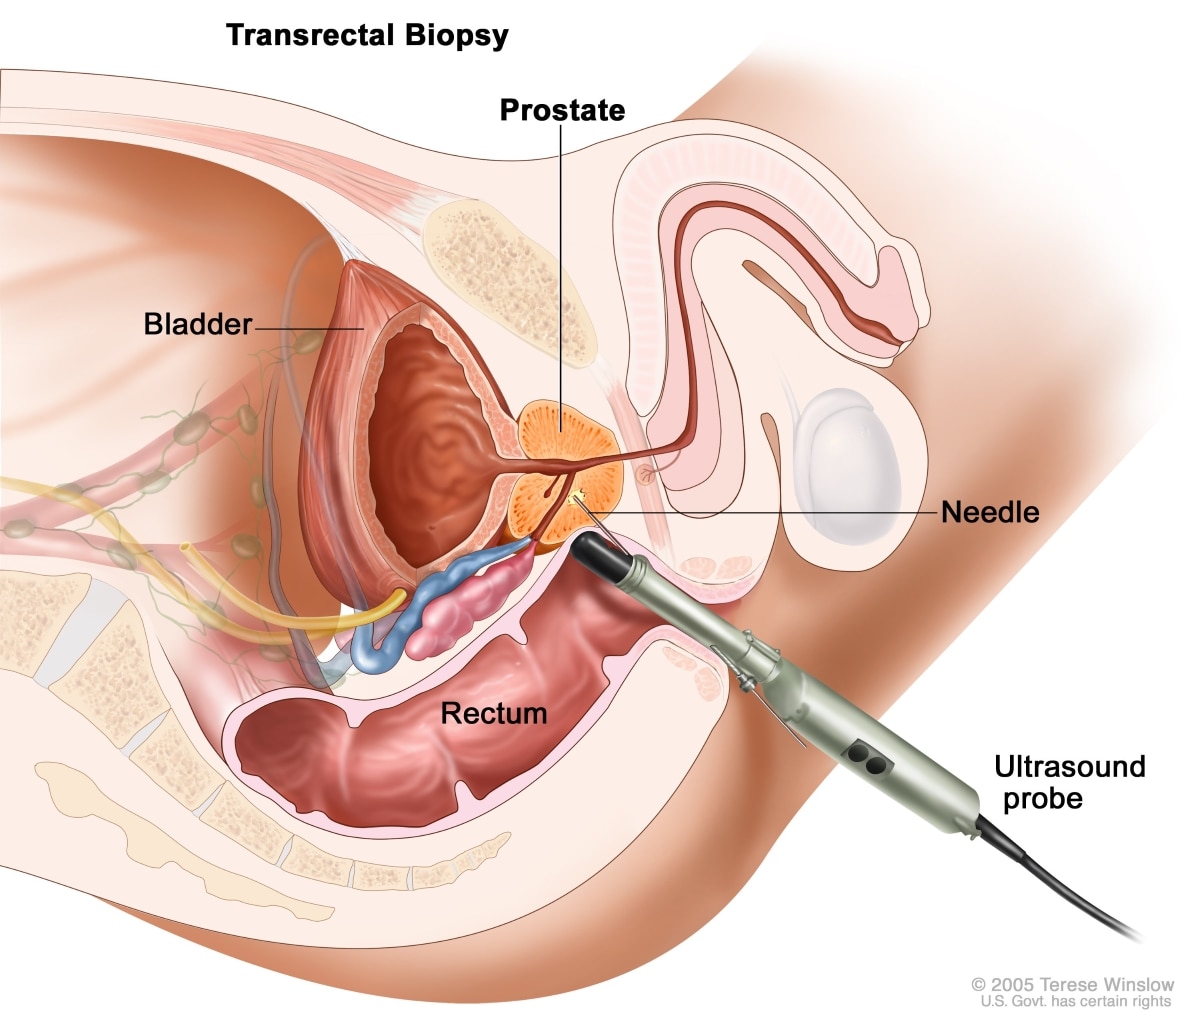 Cross-section of male anatomy shows an ultrasound probe with needle inserted into the rectum taking a tissue sample from the prostate. Labels show the bladder, rectum, prostate, ultrasound probe, and needle.